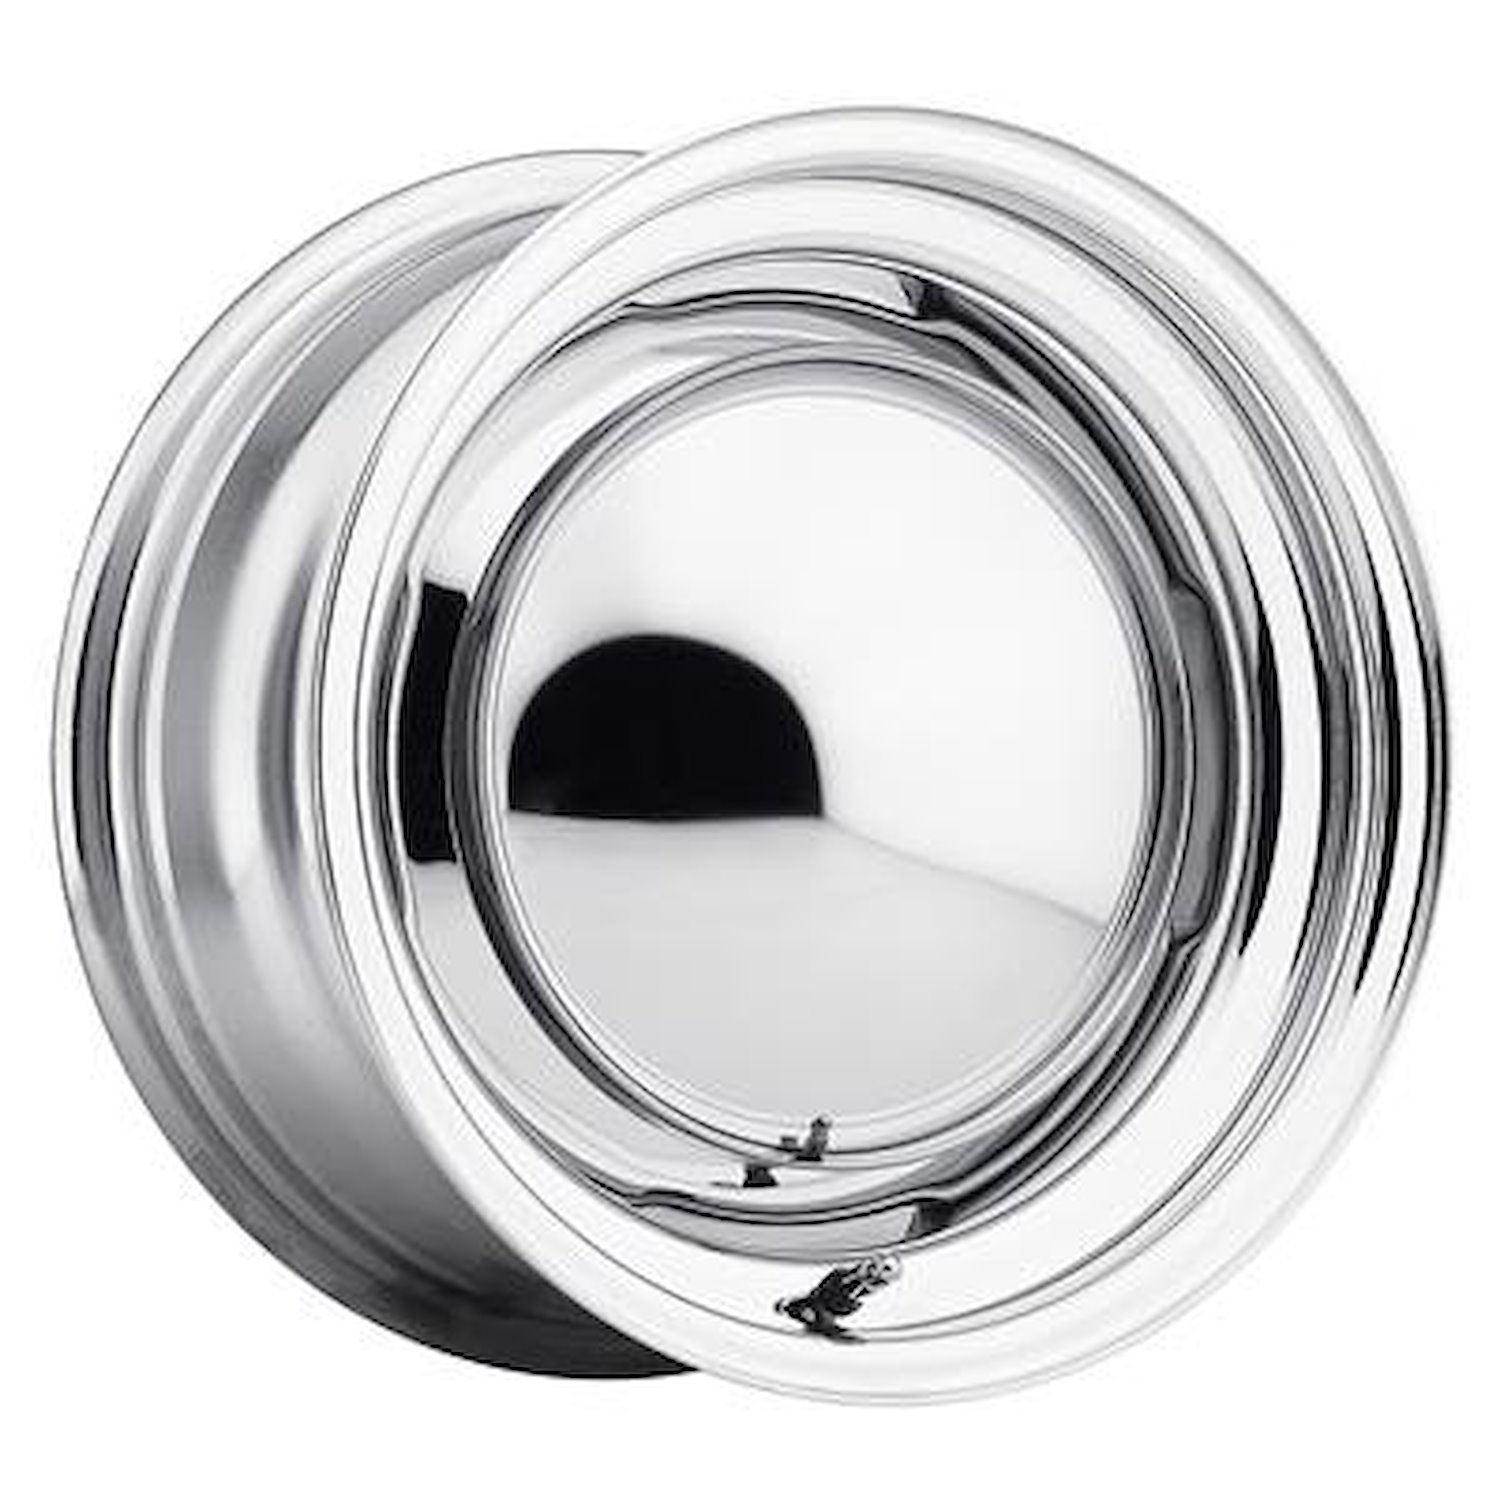 PAINT READY OEM 17X8 5X4.75 Back Space 0